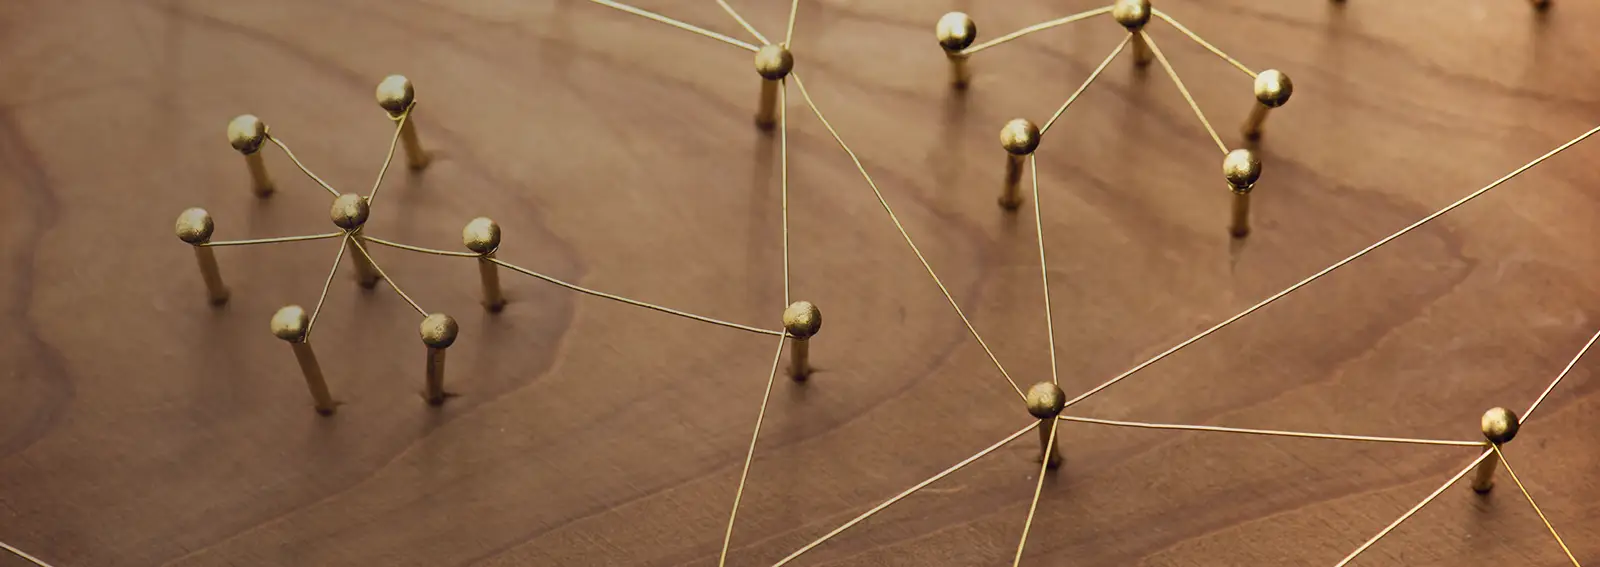 Company structure illustrated with pins in a wood board